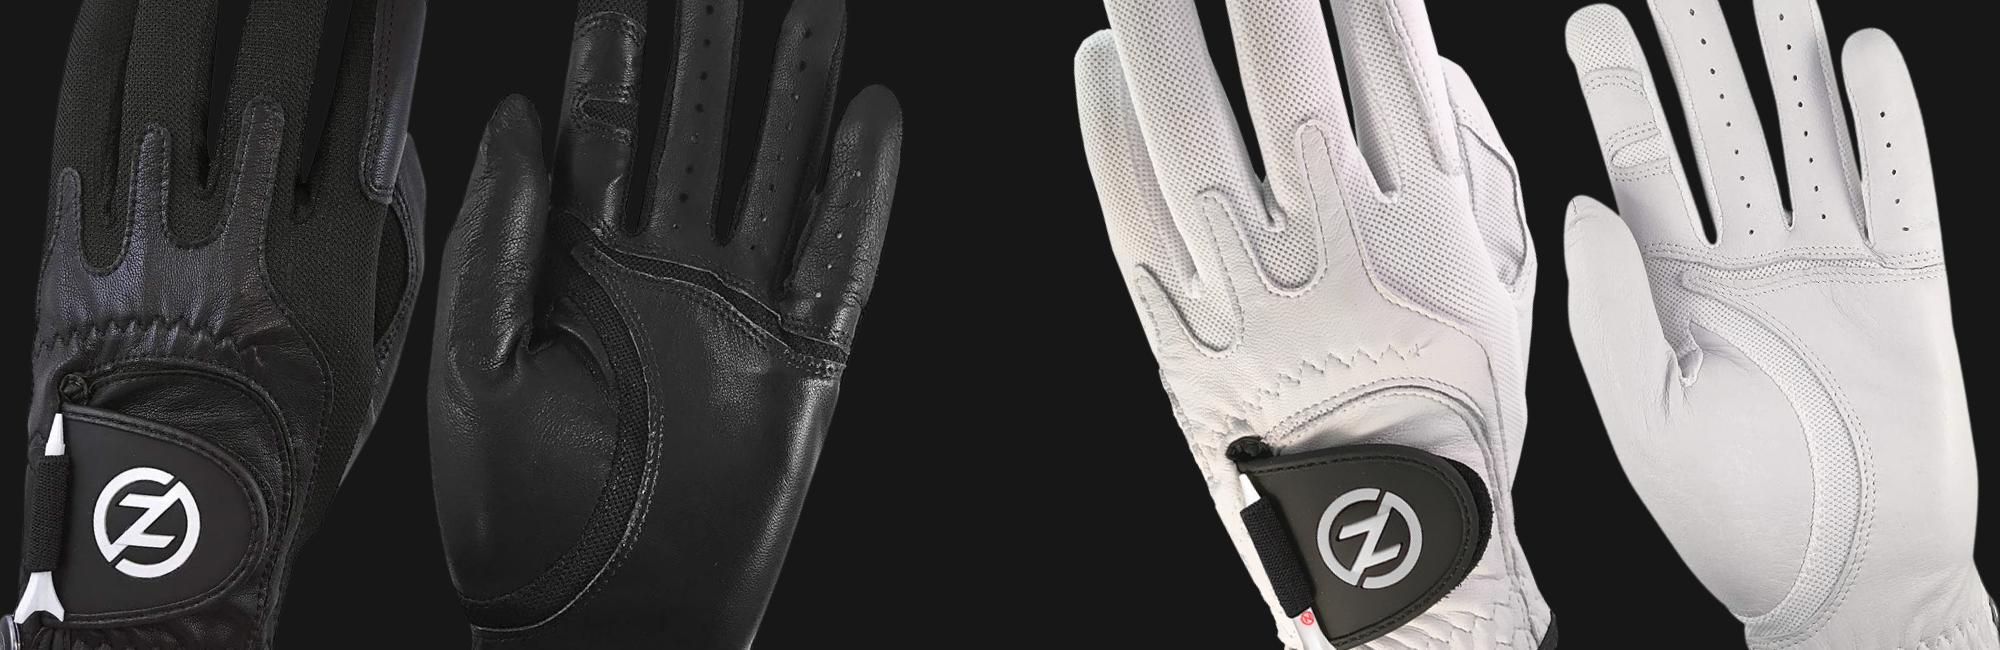 Zero Friction Collection, Golf Glove Collection